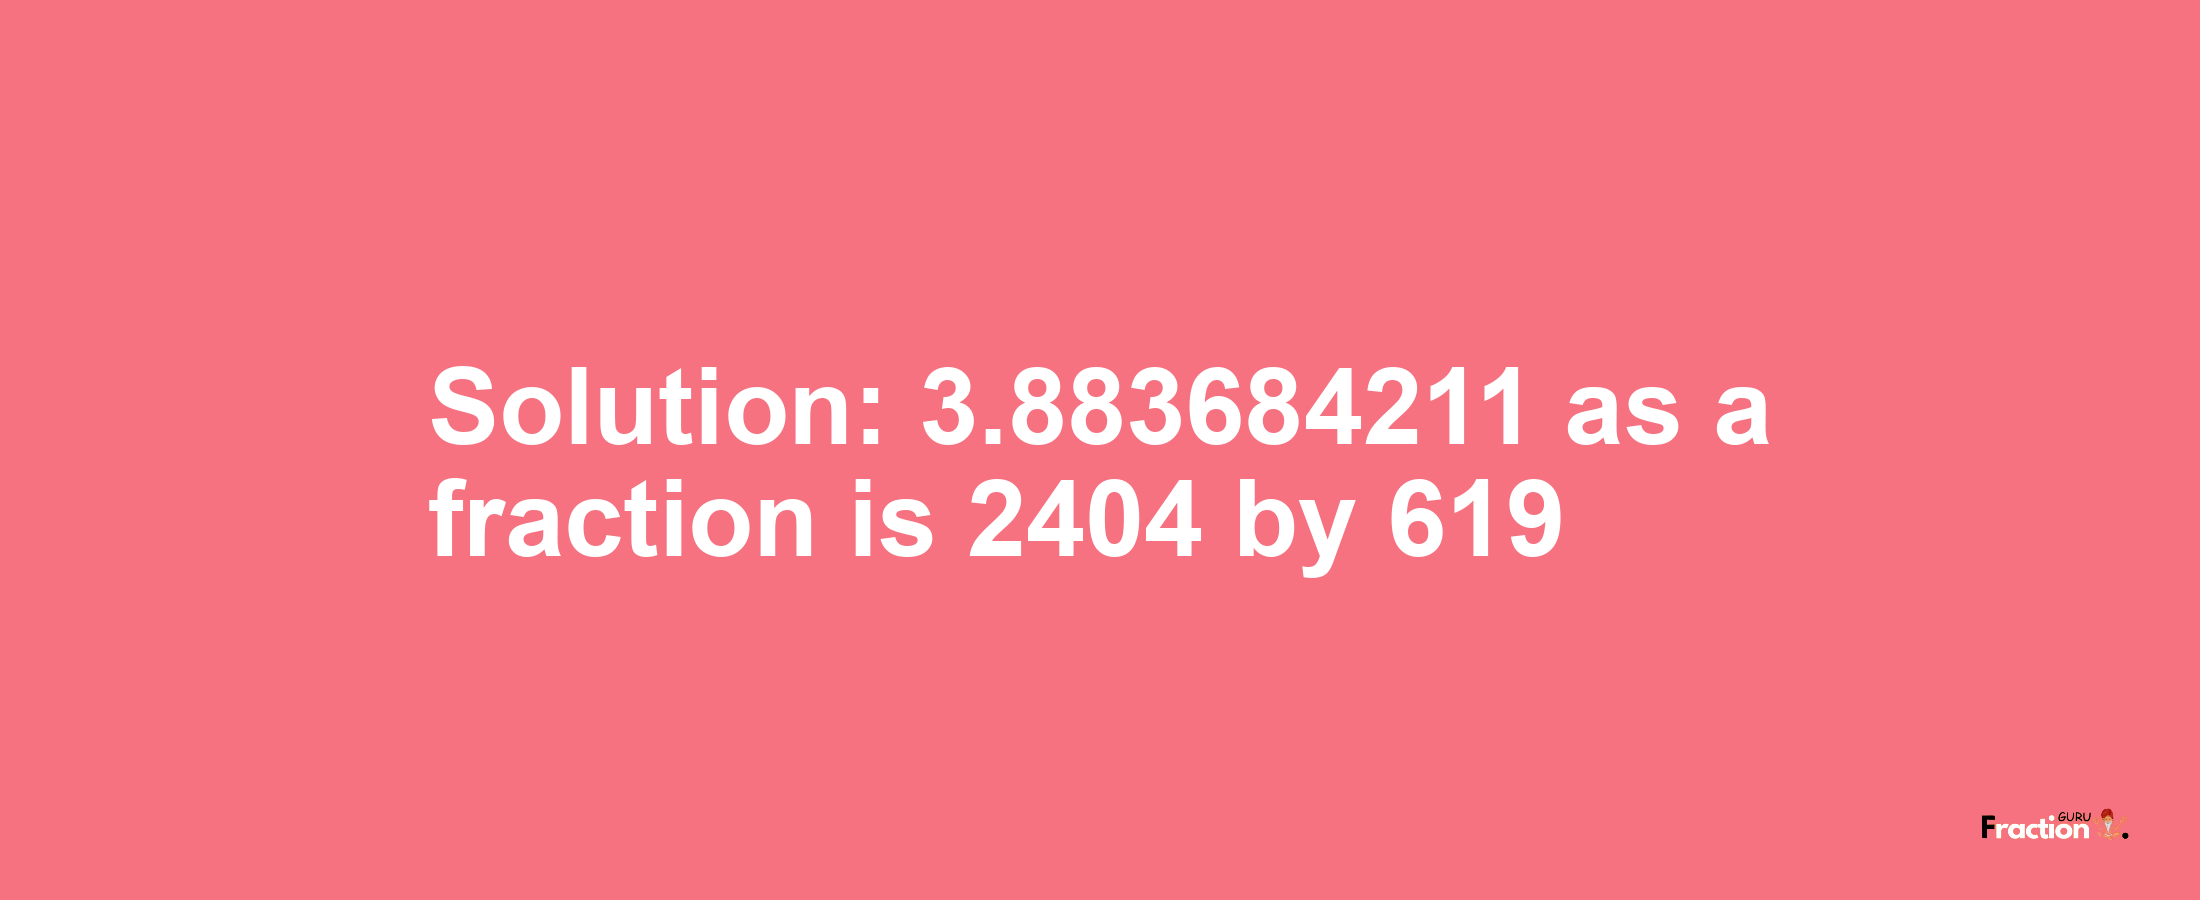 Solution:3.883684211 as a fraction is 2404/619